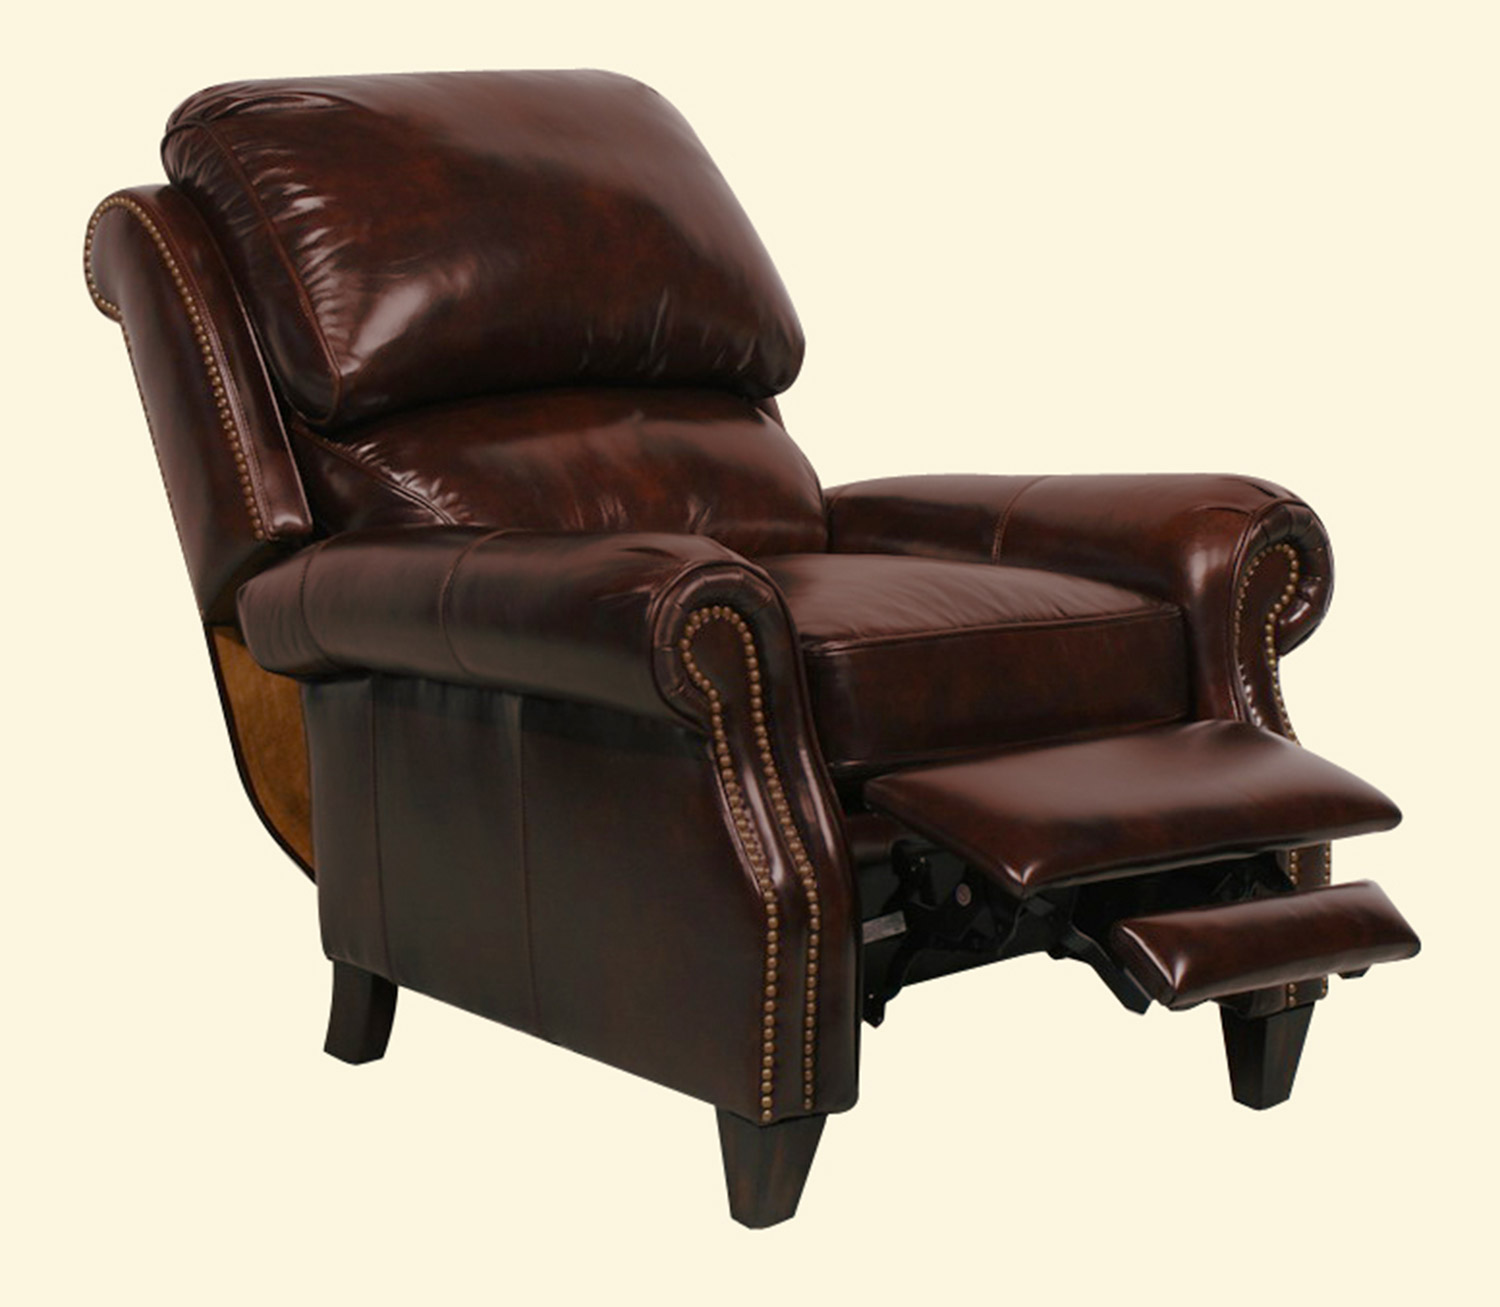 Barcalounger Churchill ll Vintage Reserve Leather Recliner - Fudge